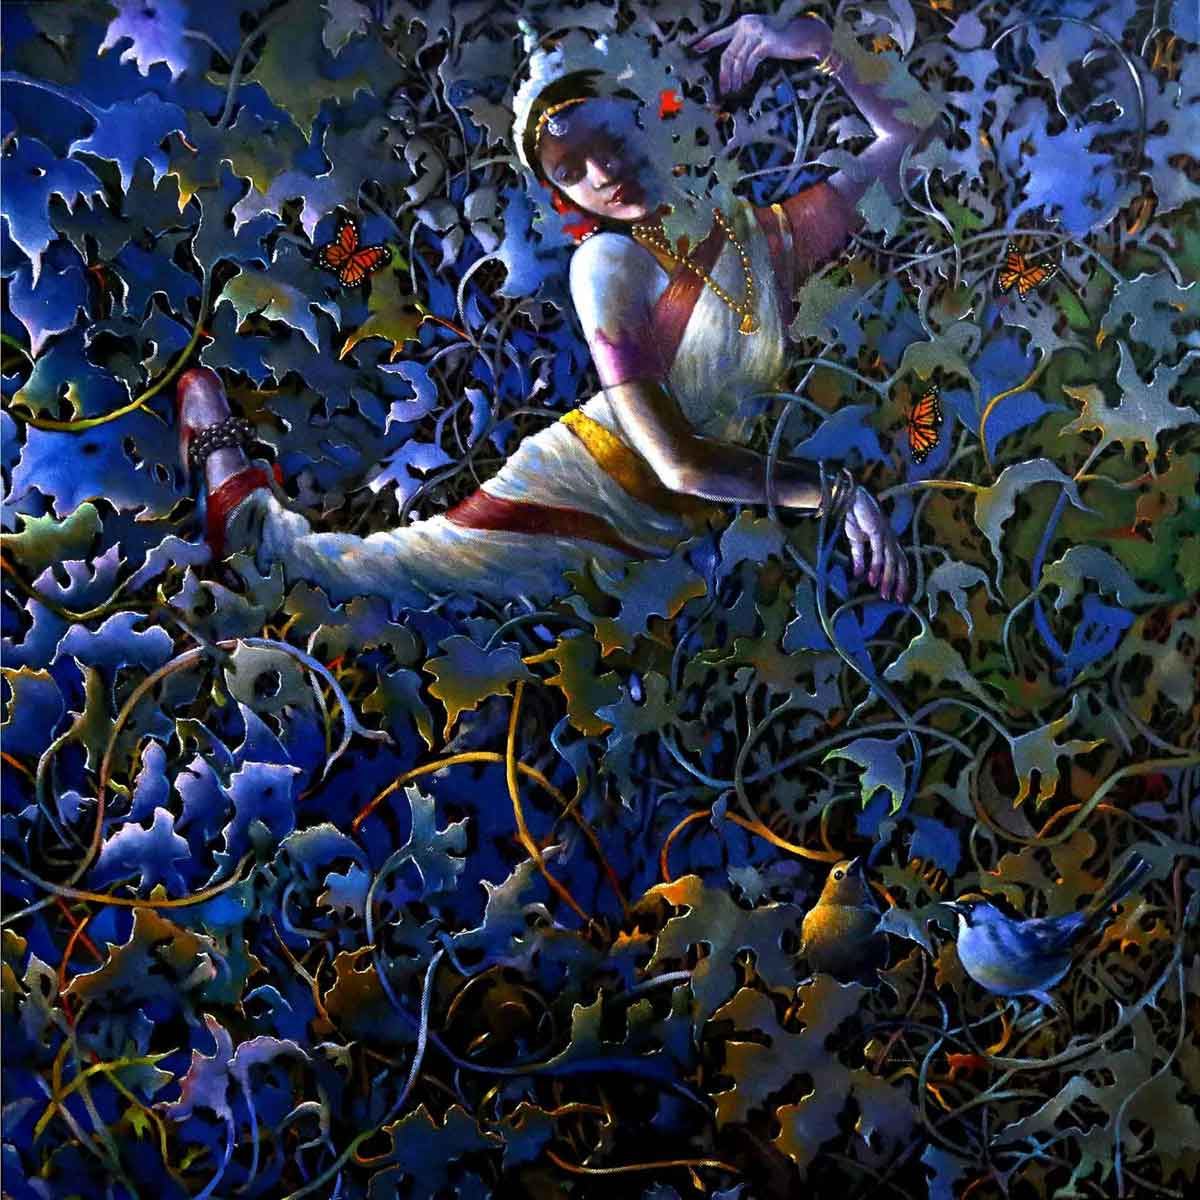 Figurative Painting with Oil on Canvas "Rhythm of Nature" art by Gautam Partho Roy